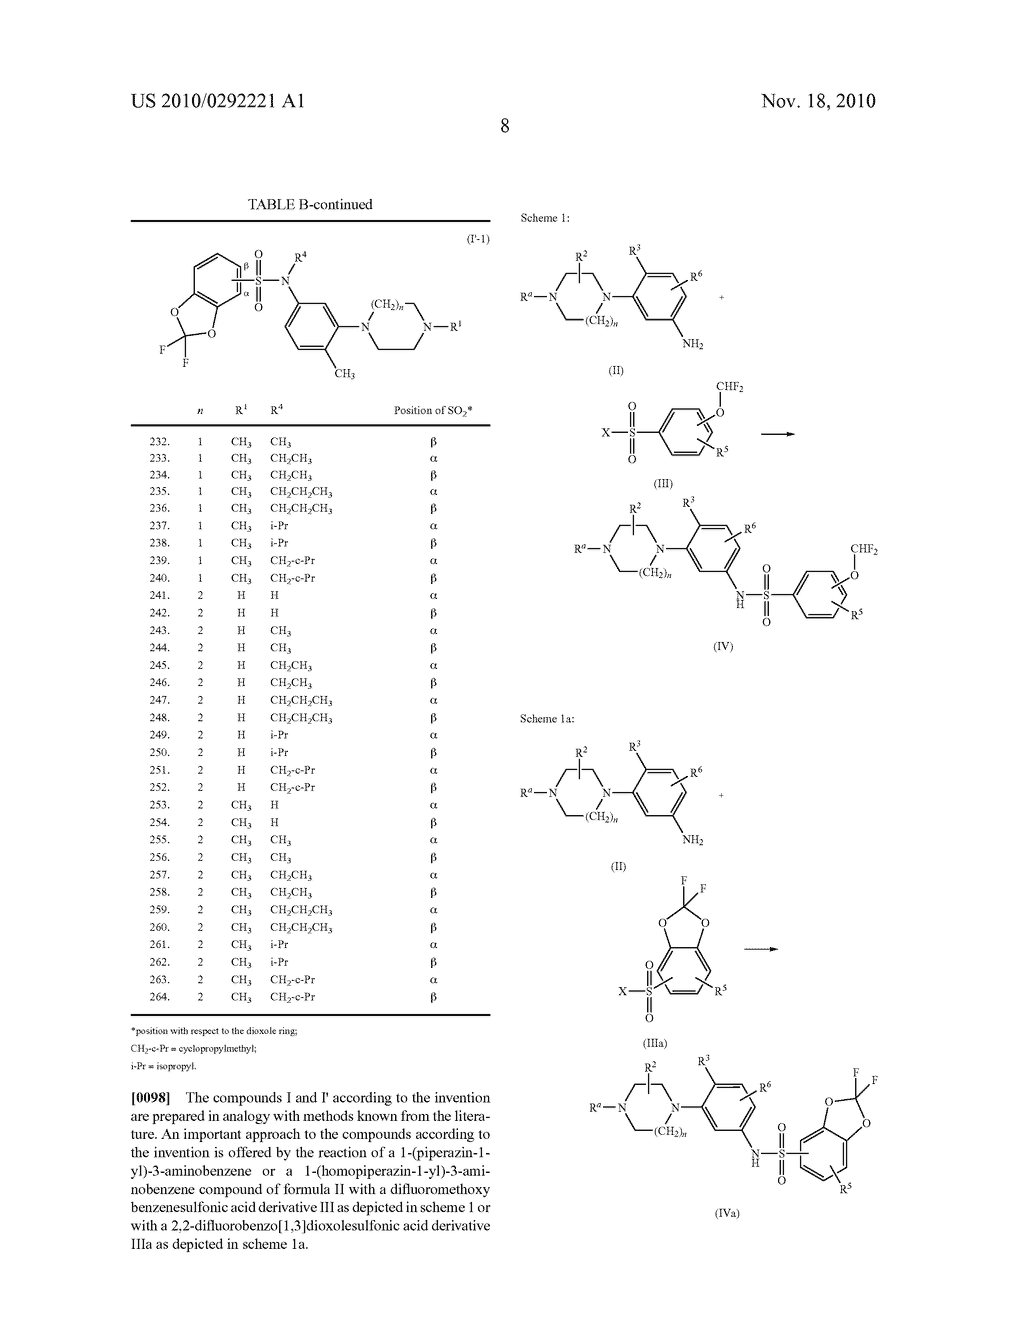 BENZENESULFONANILIDE COMPOUNDS SUITABLE FOR TREATING DISORDERS THAT RESPOND TO MODULATION OF THE SEROTONIN 5-HT6 RECEPTOR - diagram, schematic, and image 09